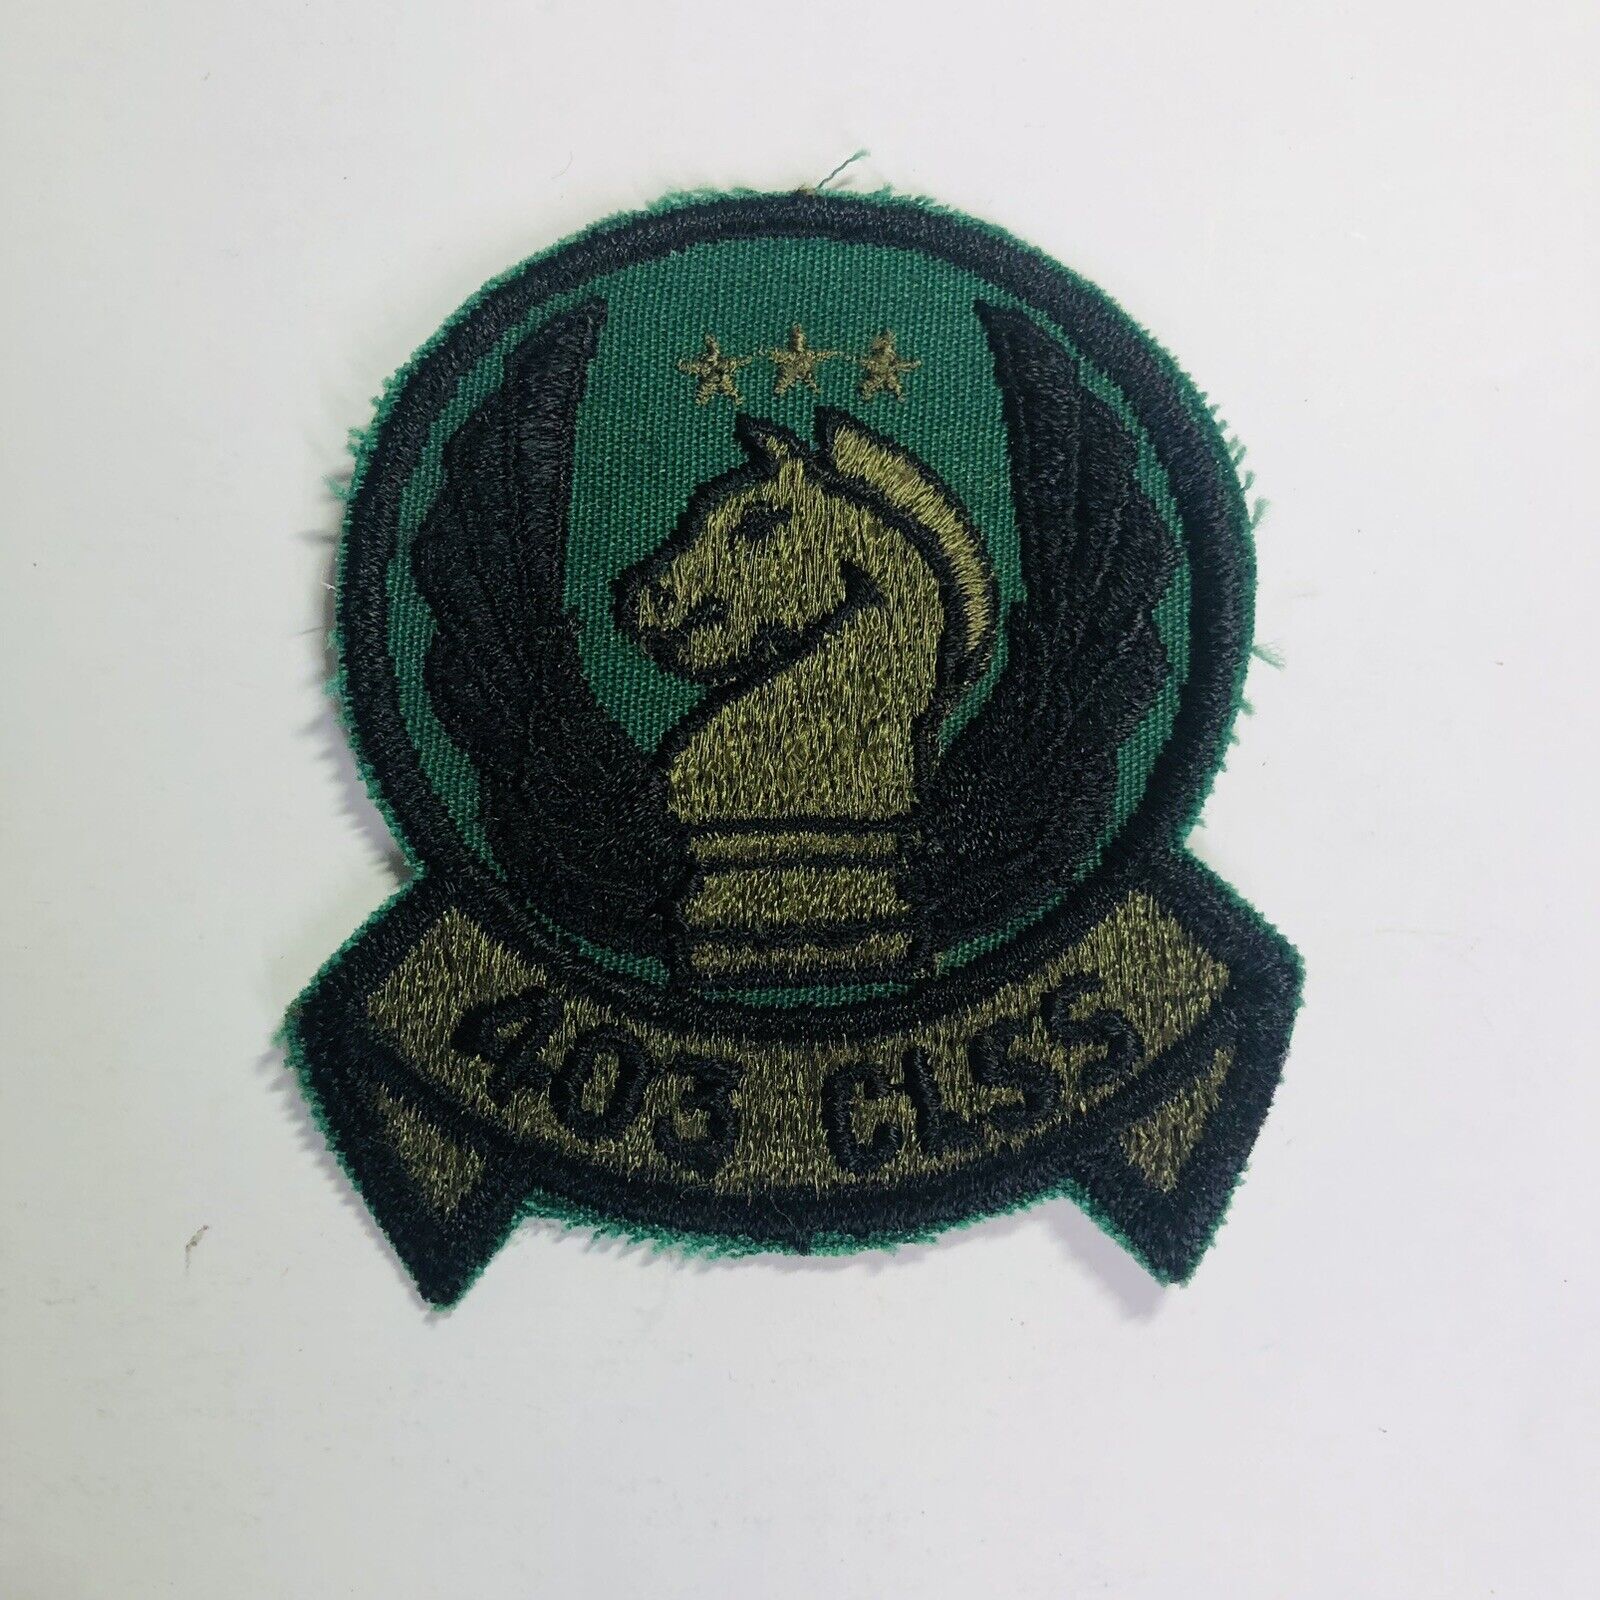 USAF 403rd Combat logistics Support Squadron (403CLSS) Patch 3 3/4 x 3 1/4 inche